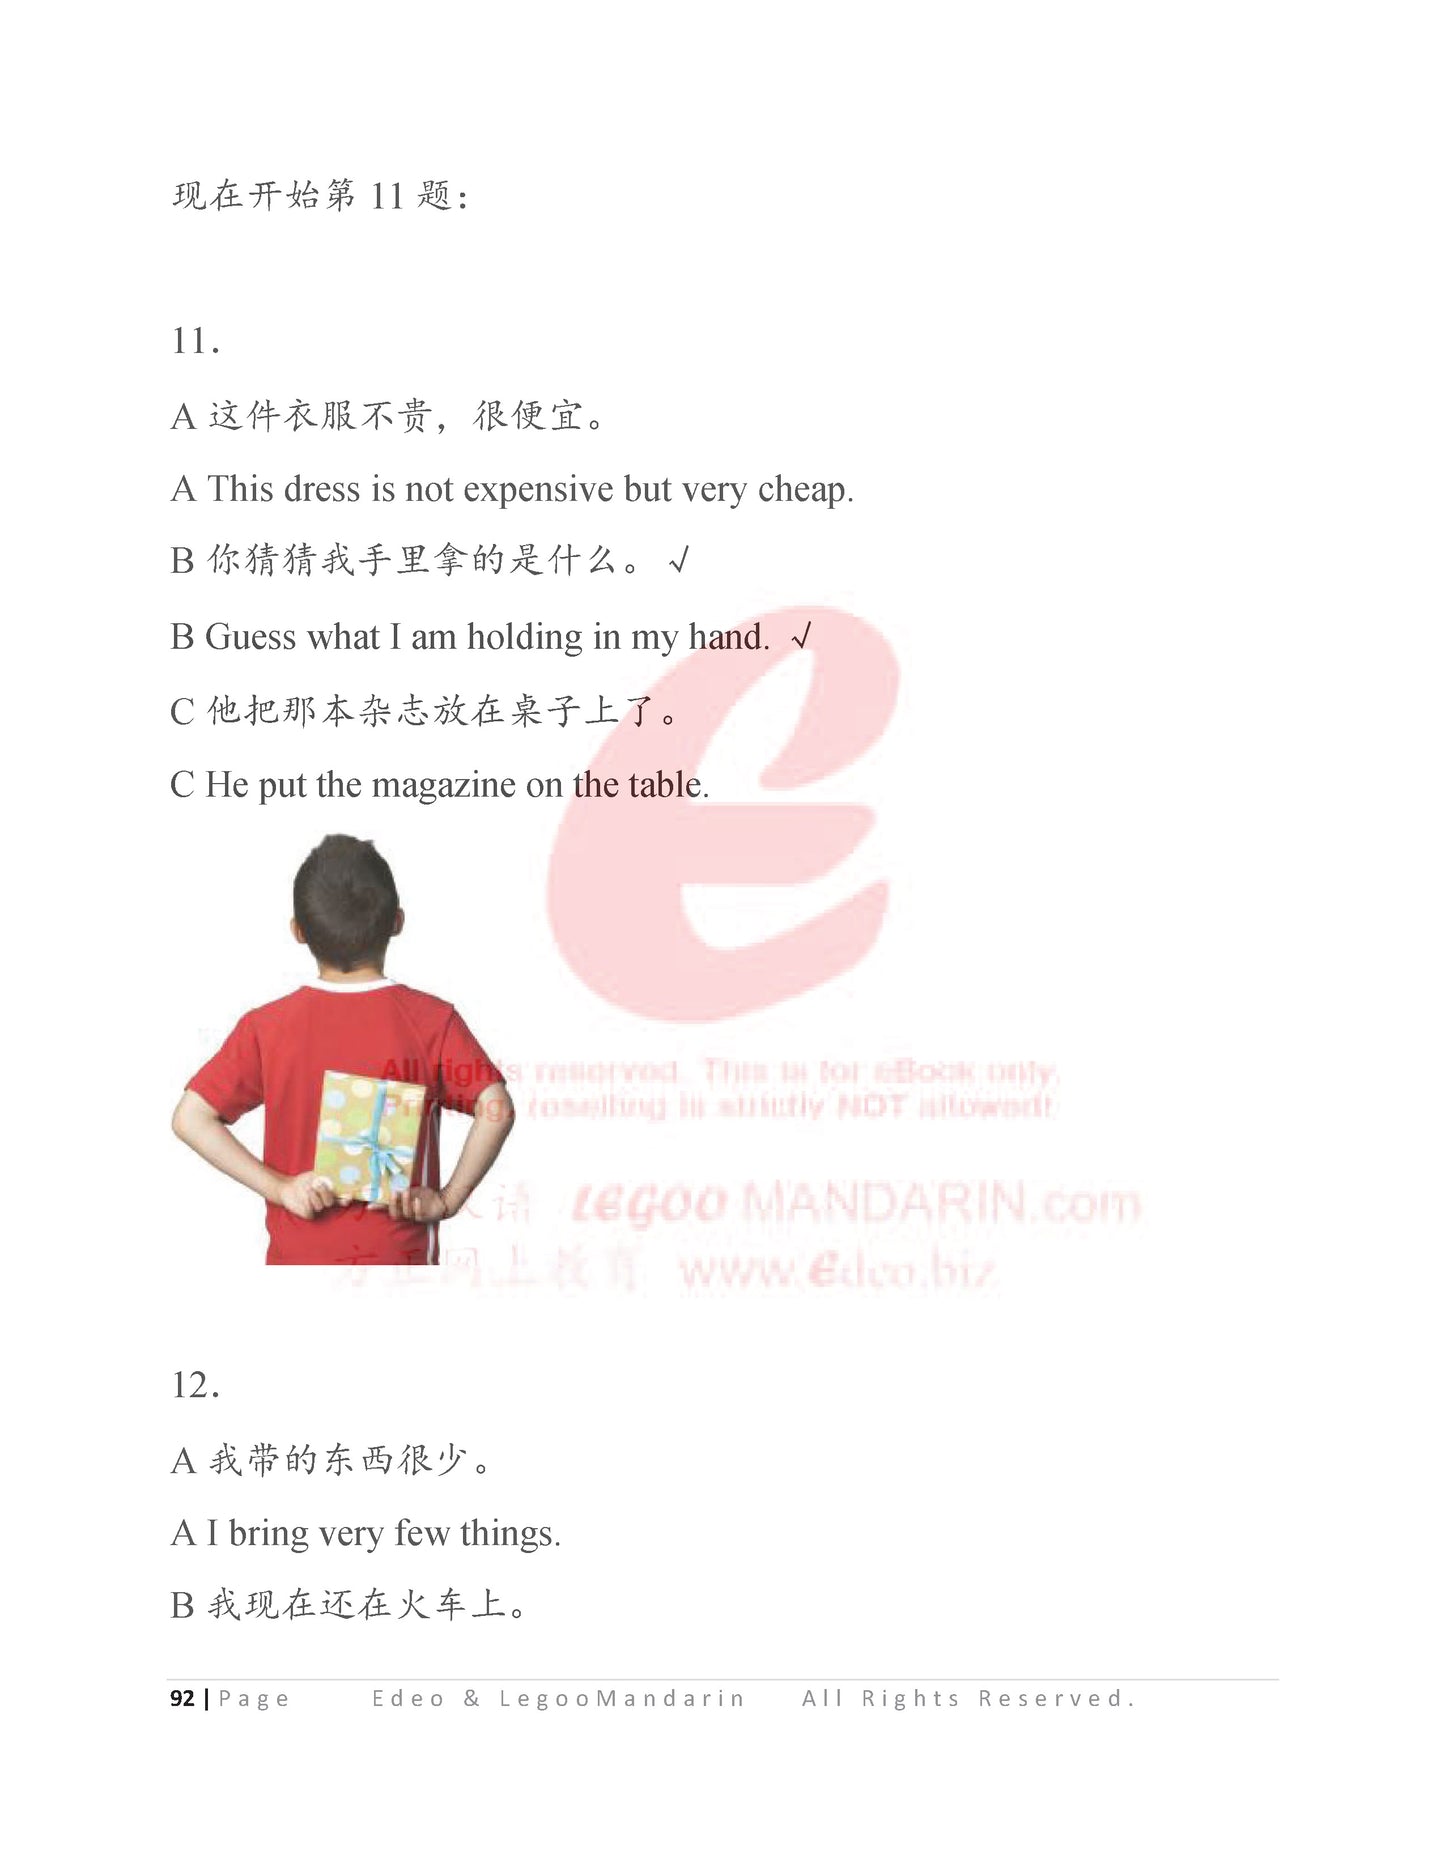 YCT 4 Chinese Intensive Reading for Kids Y40901 新中小学生汉语考试